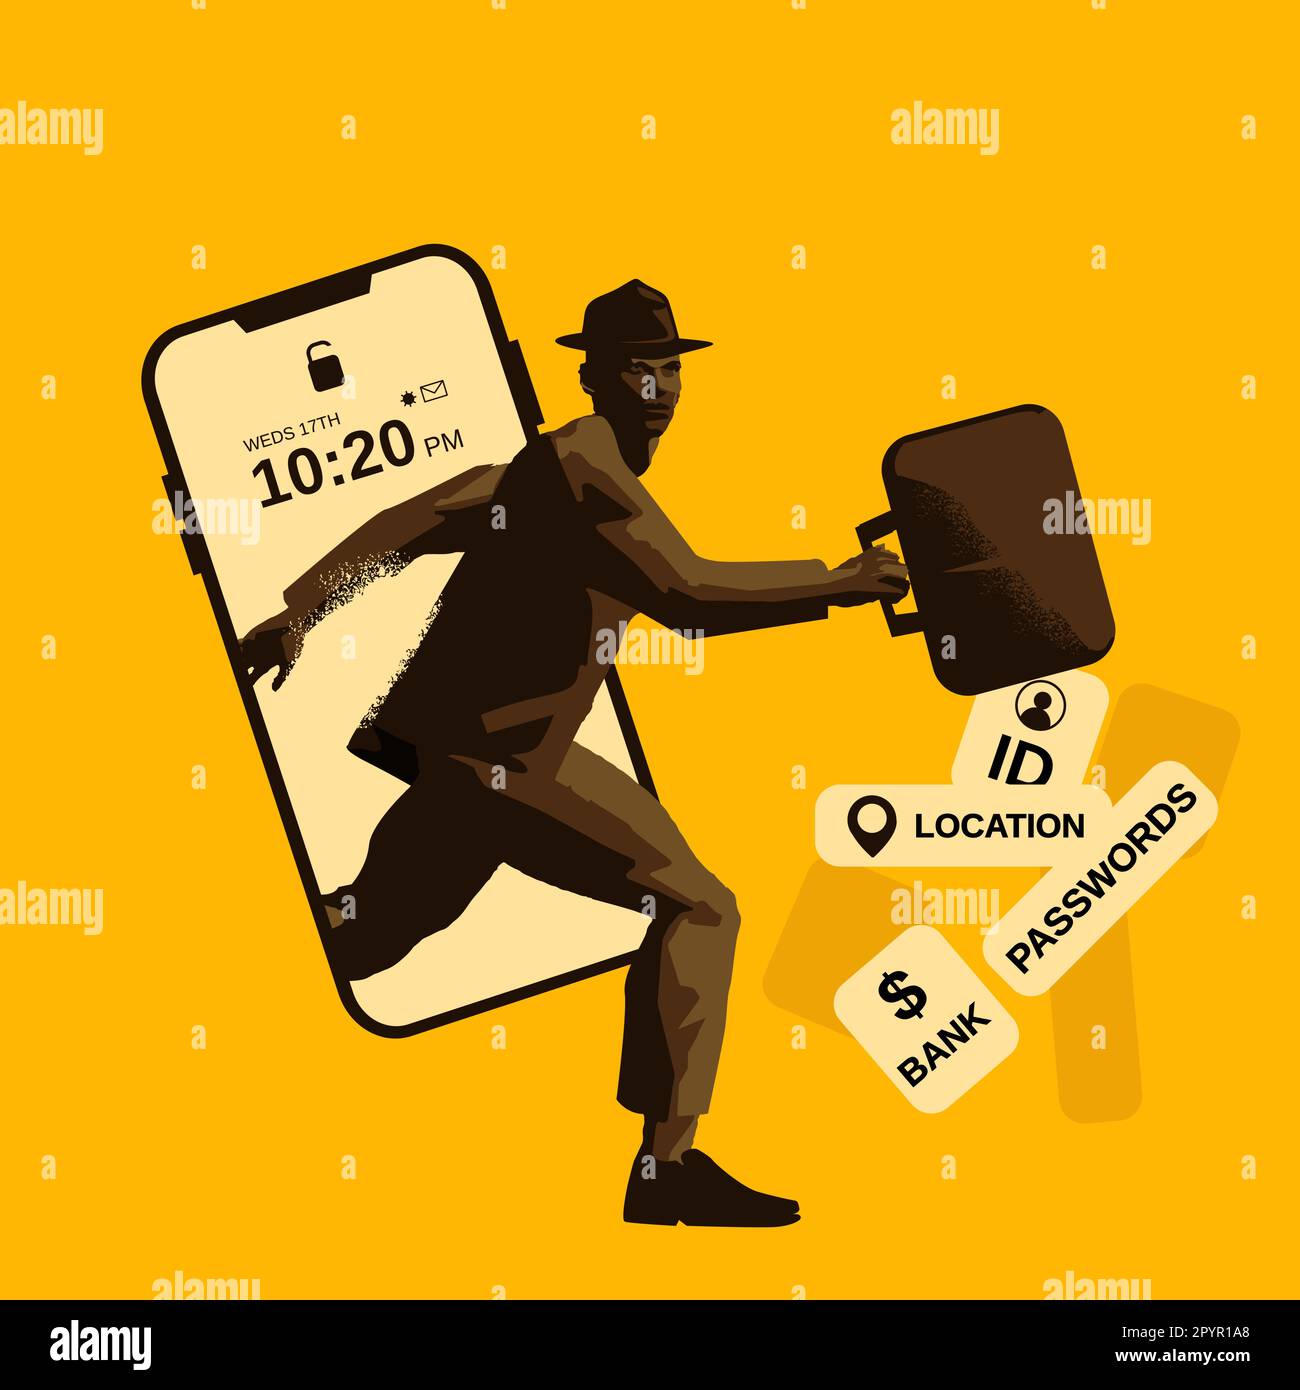 Digital online identity theft and social engineering. A thief stealing personal identifiable data from a smartphone. People fraud concept vector illus Stock Vector